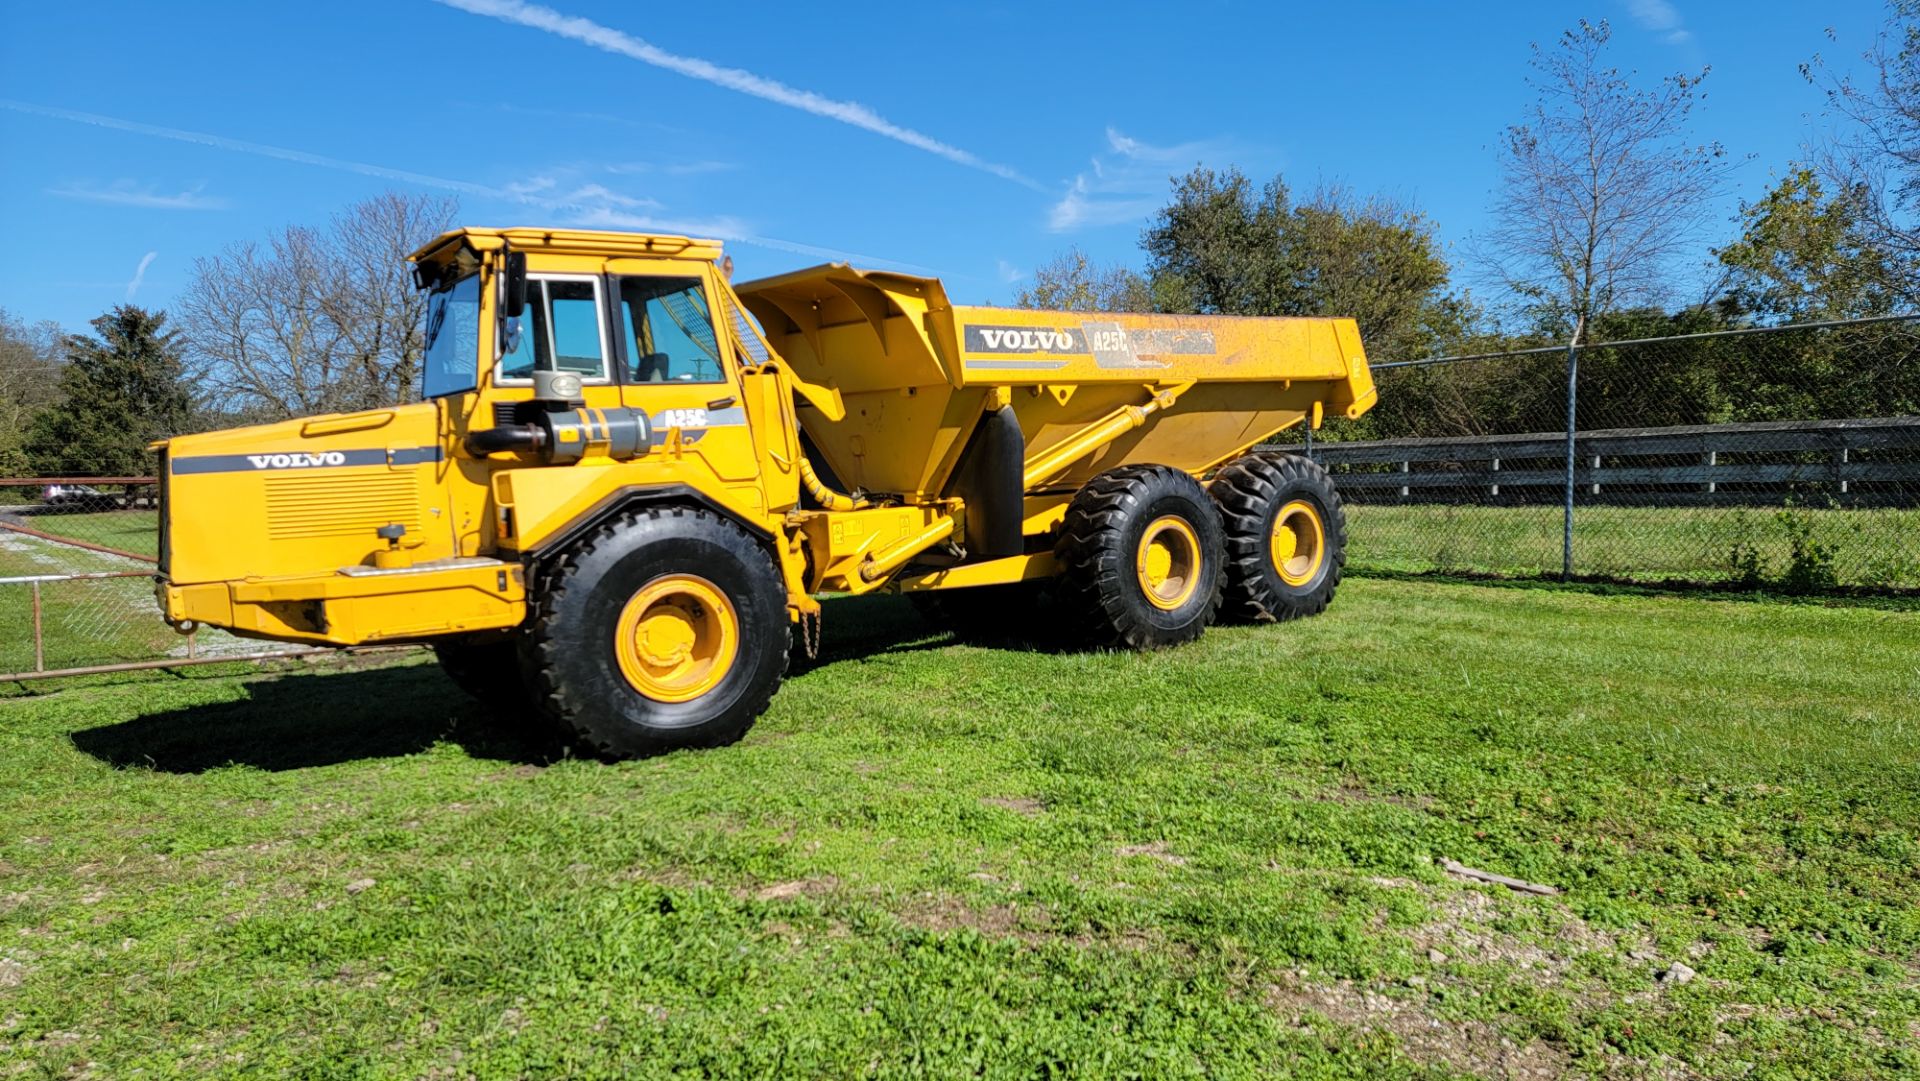 Volvo A25C 6x6 Offroad Dump Truck, 30,519 Miles, 12,411 Hours, s/n 5350V61011 - Image 5 of 34